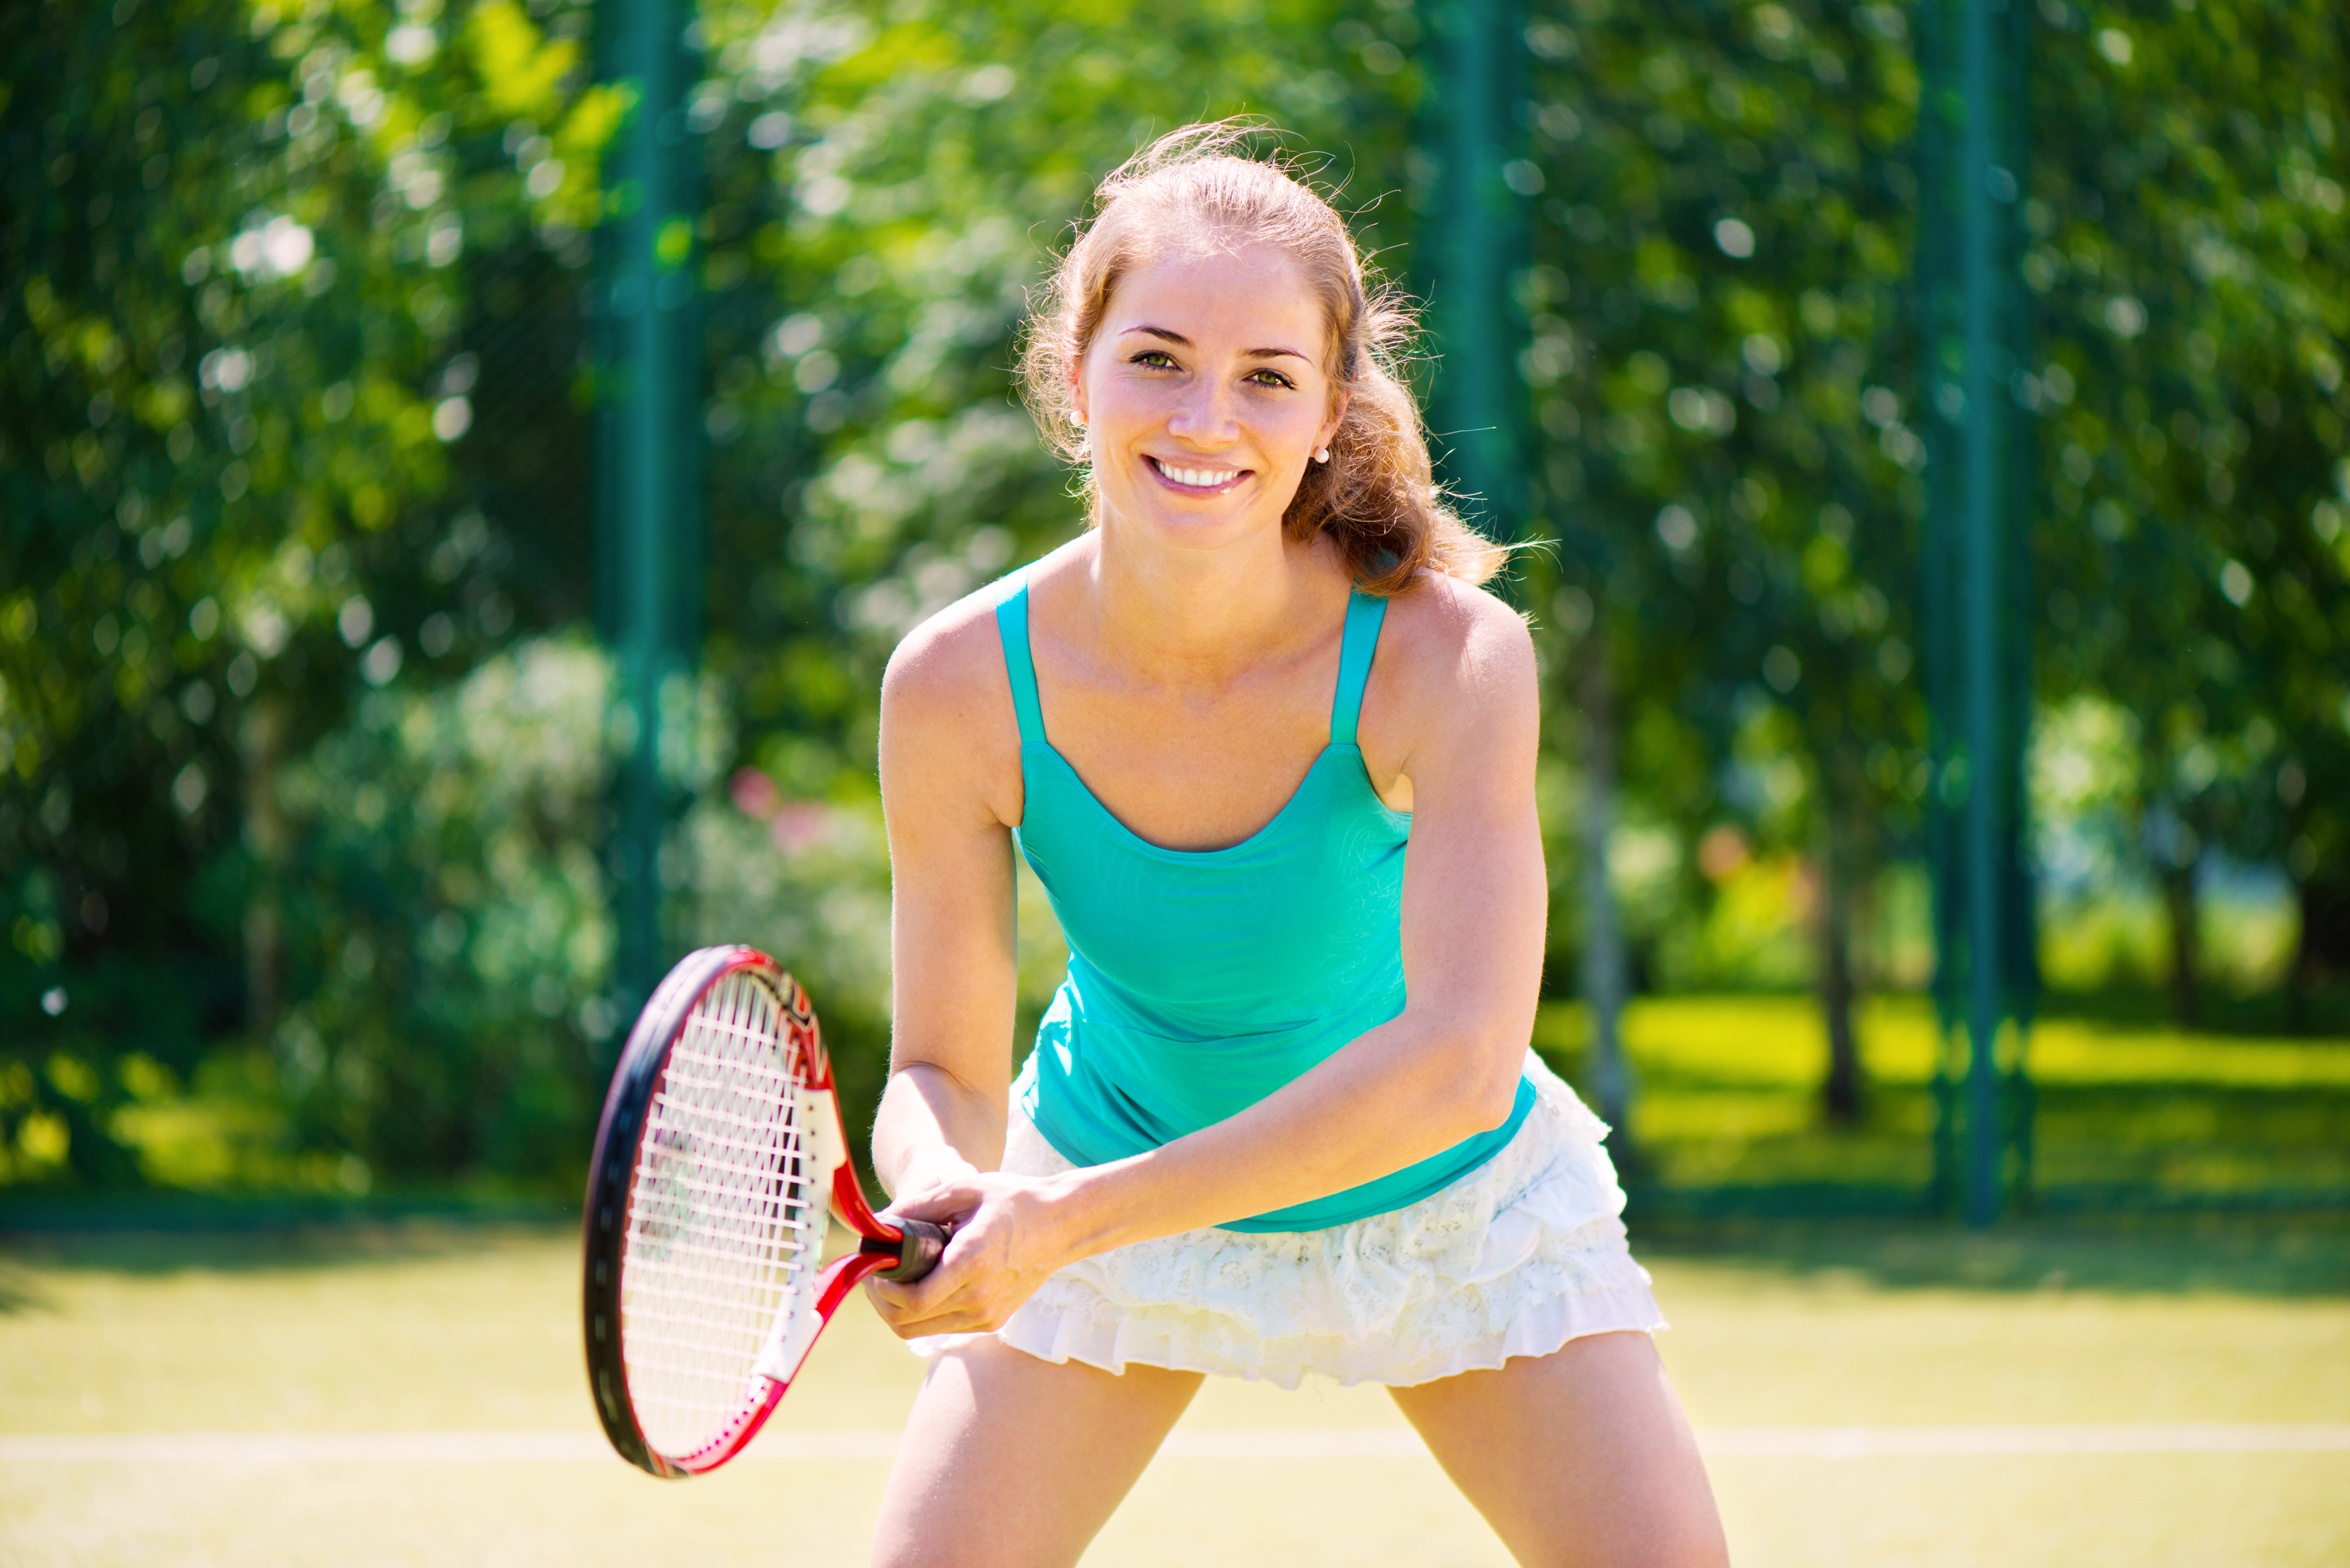 14 Ideas to Make Tennis Lessons Fun at Any Level